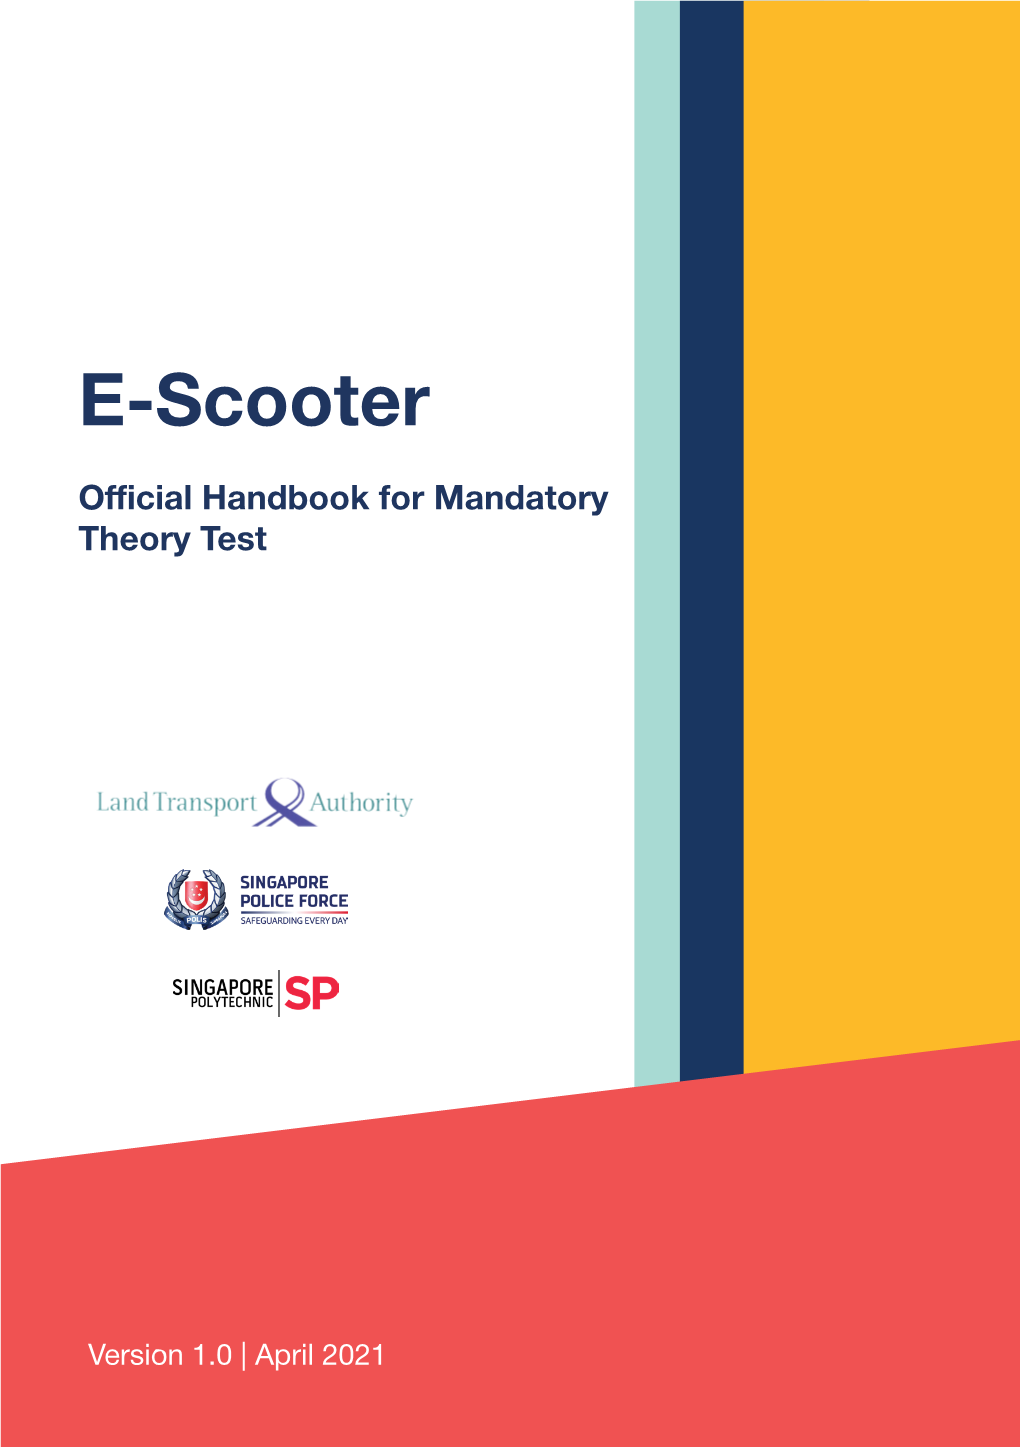 E-Scooter Theory Test Certificate to Ride an E-Scooter*